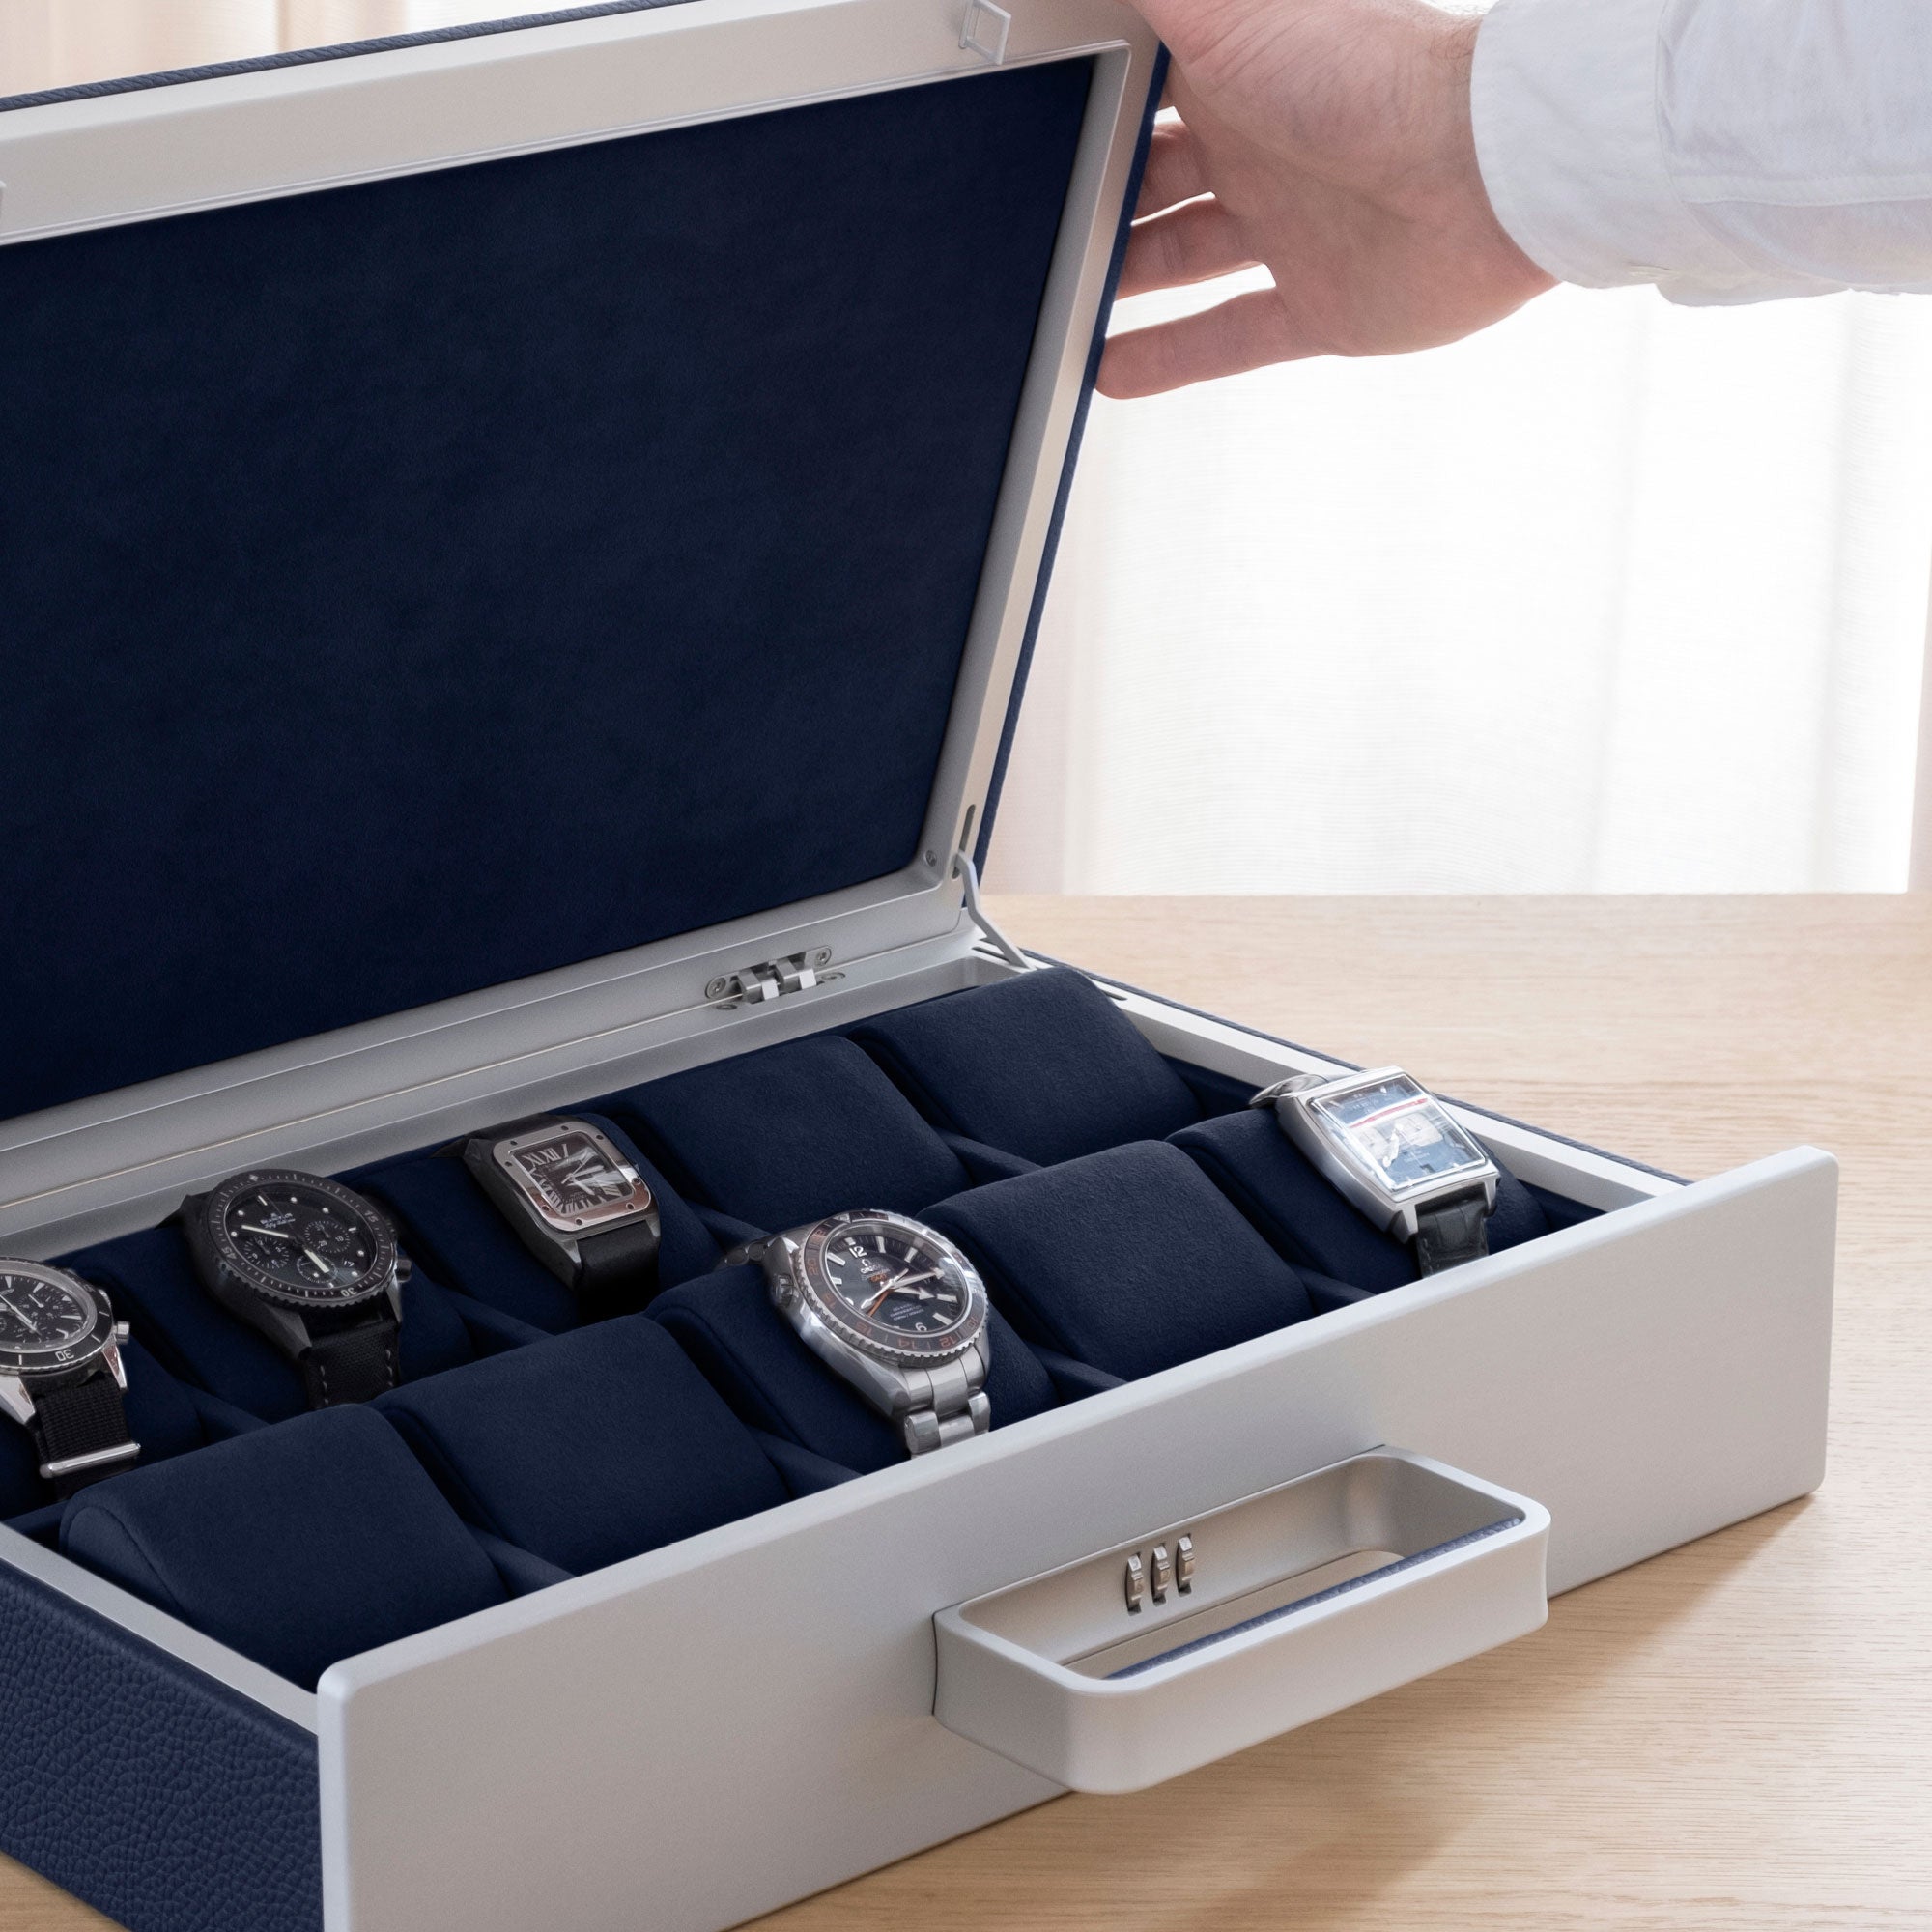 Lifestyle shot of Mackenzie Watch briefcase 10 filled with luxury watches including Blancpain, Tag Heuer and Jaeger-LeCoultre placed on deep blue removable watch cushions